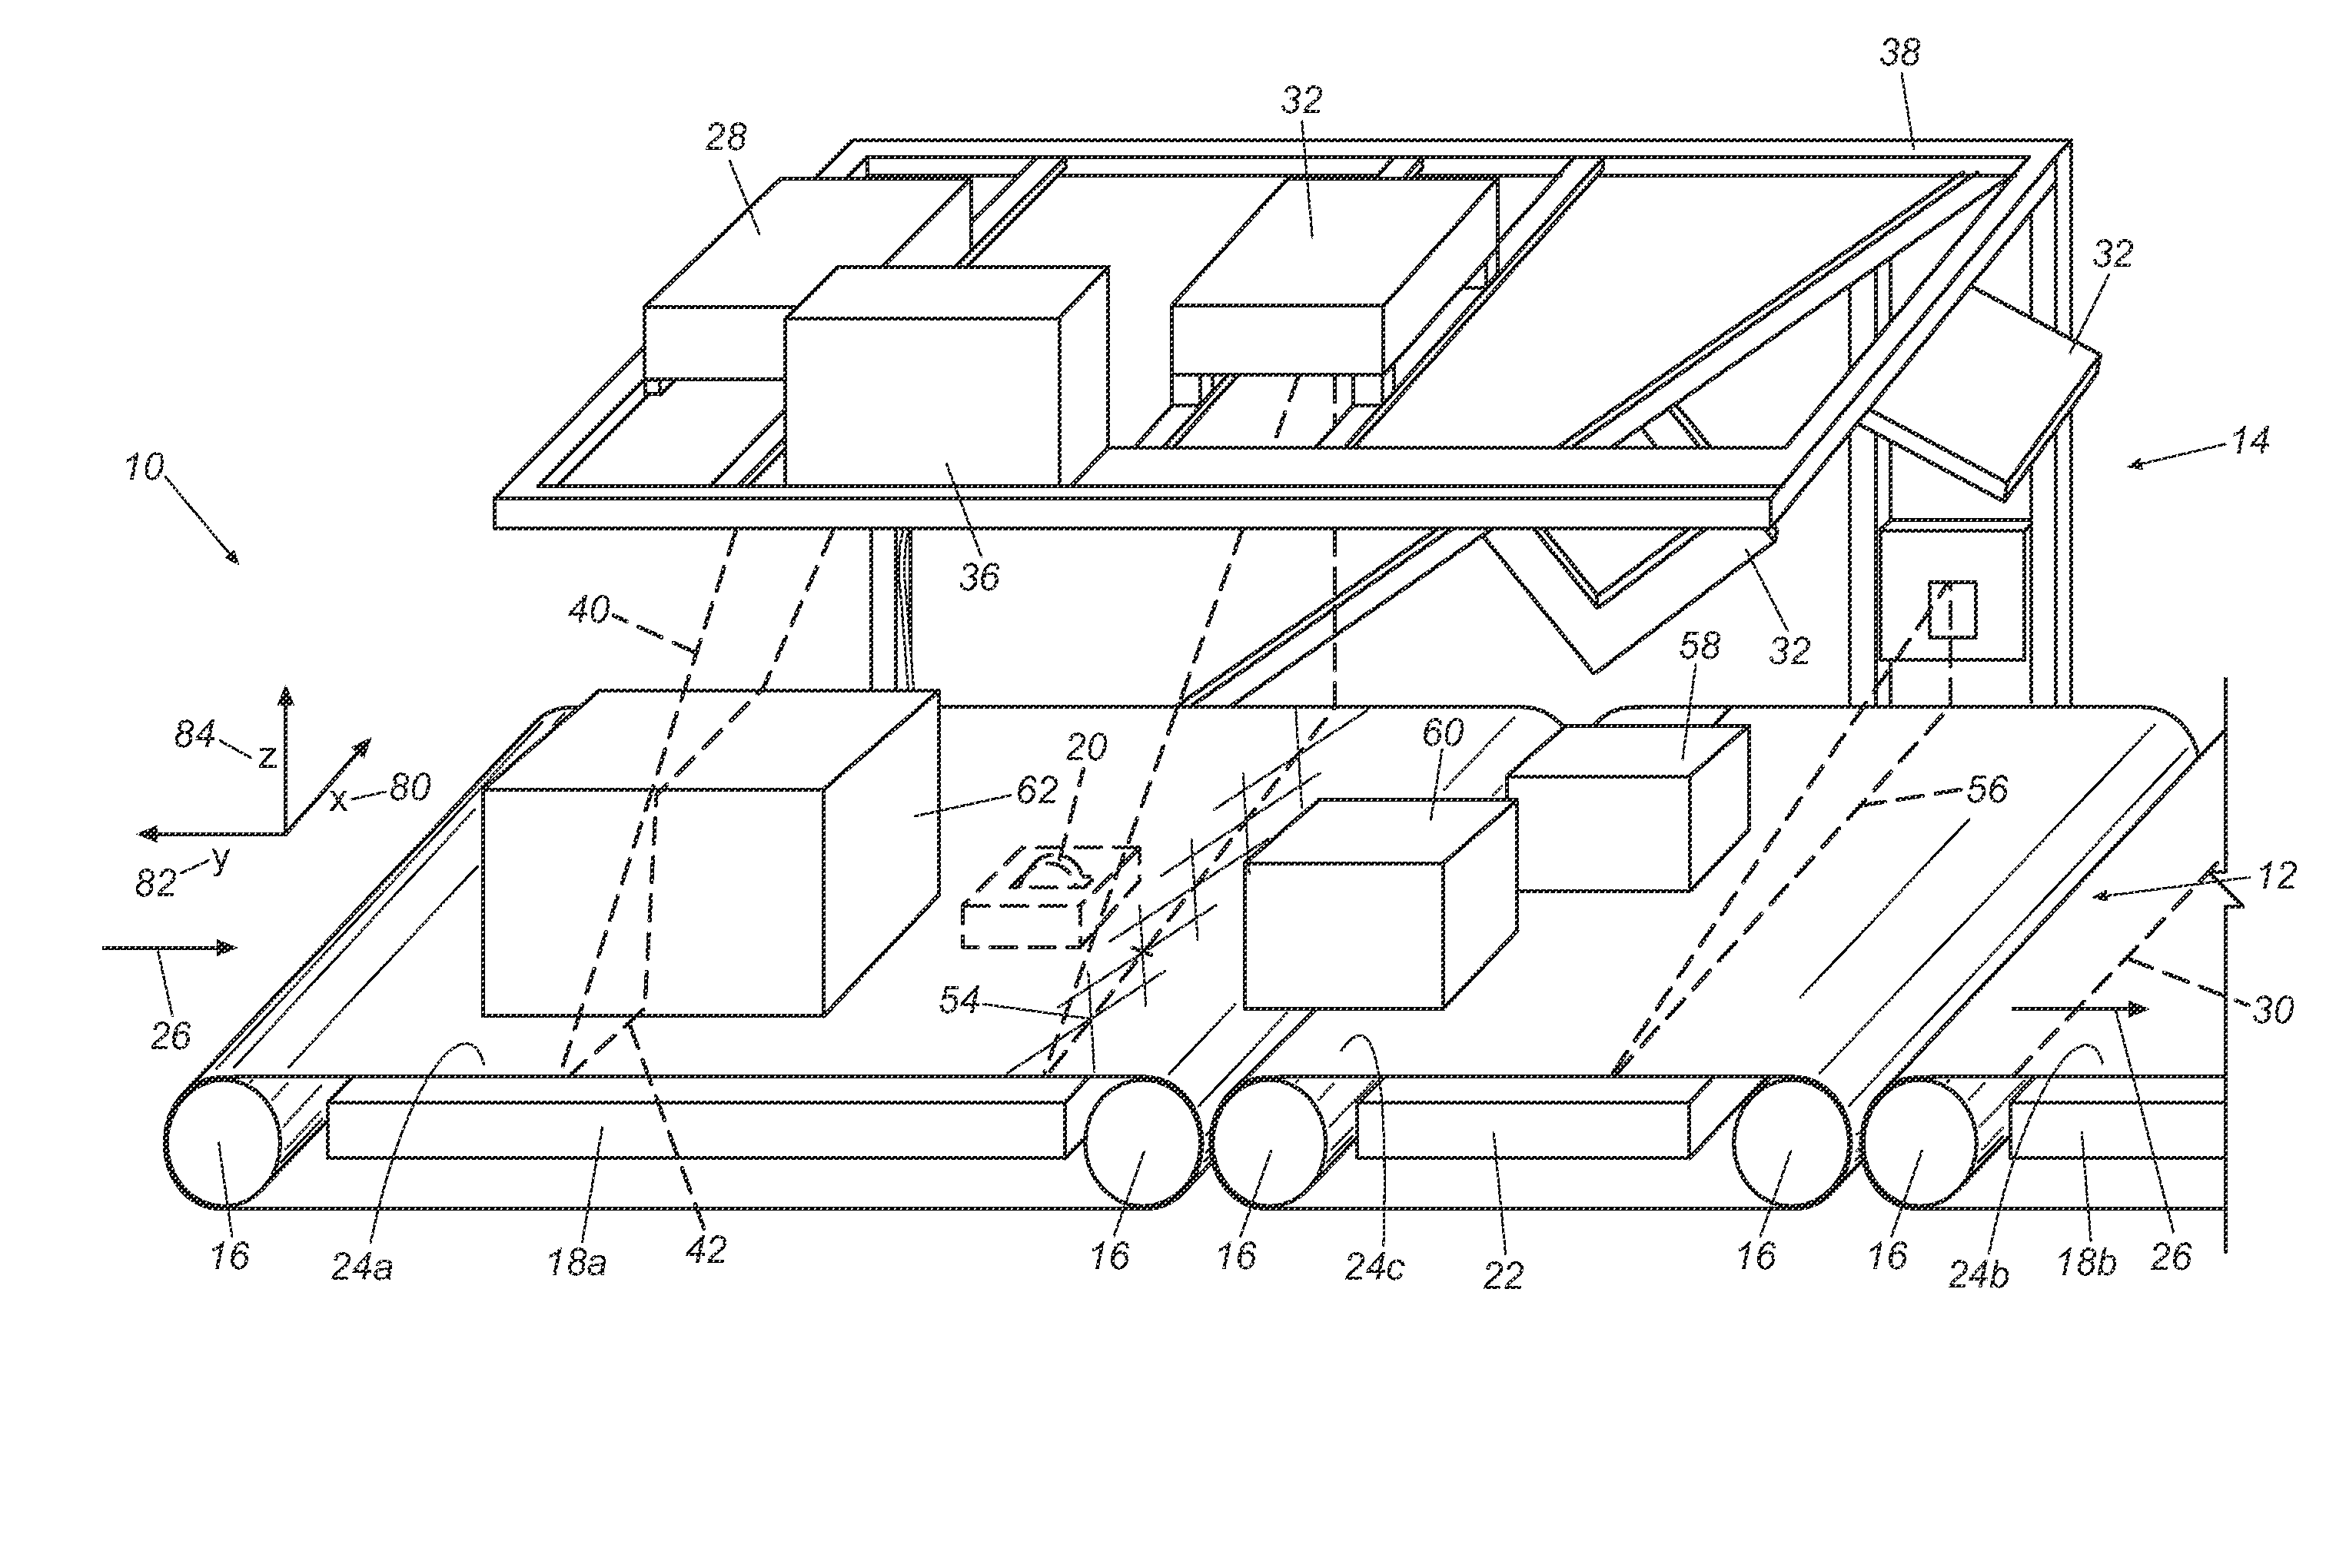 Apparatus and method for measuring the weight of items on a conveyor